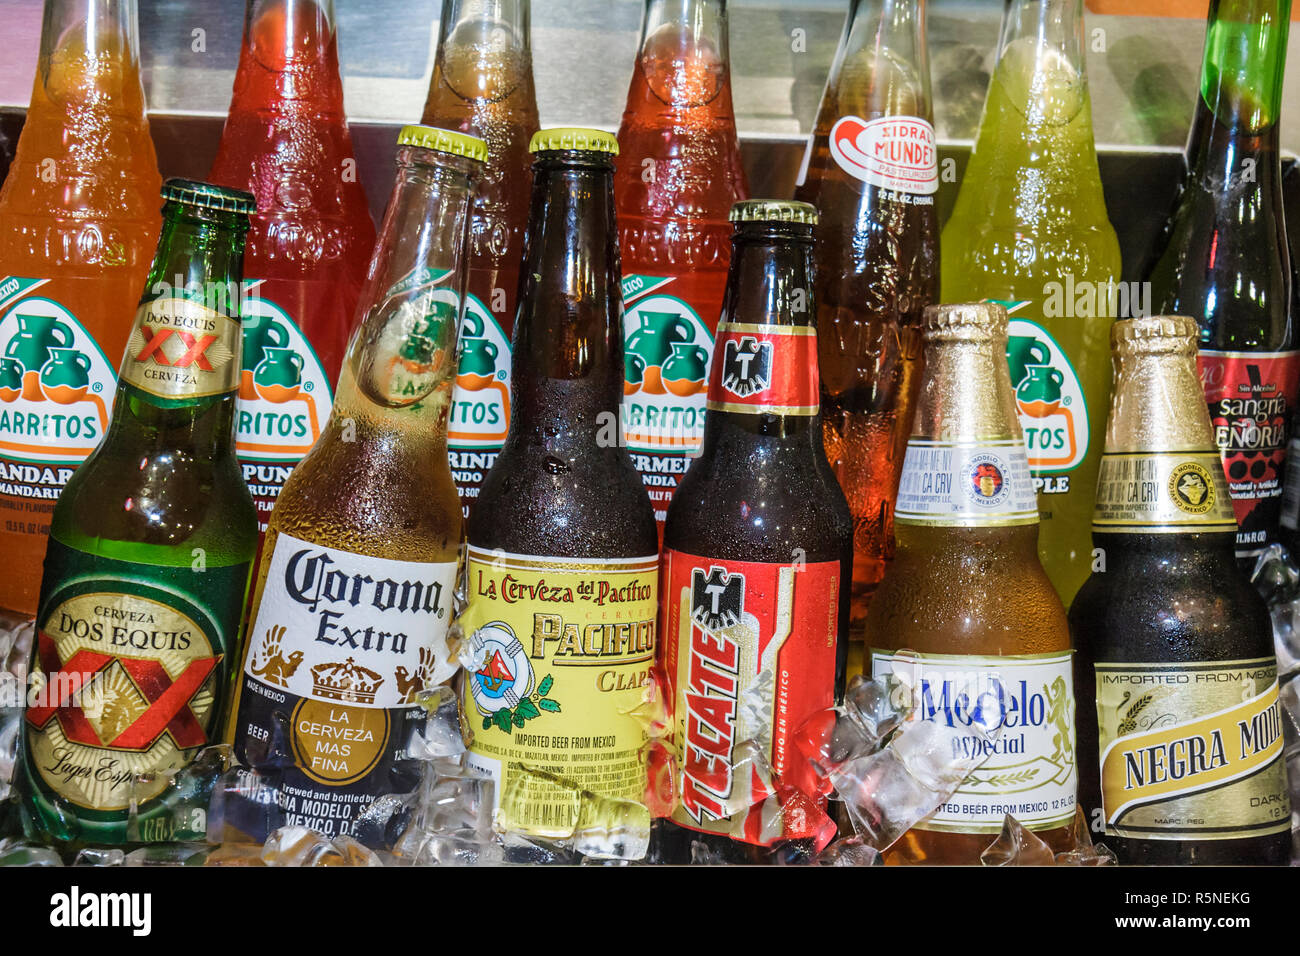 Miami Florida,Coral Gables,Miracle Mile,Chilorio's Very Mexican,restaurant restaurants food dining cafe cafes,cooler,imported beer,Corona,Dos Equis,Te Stock Photo